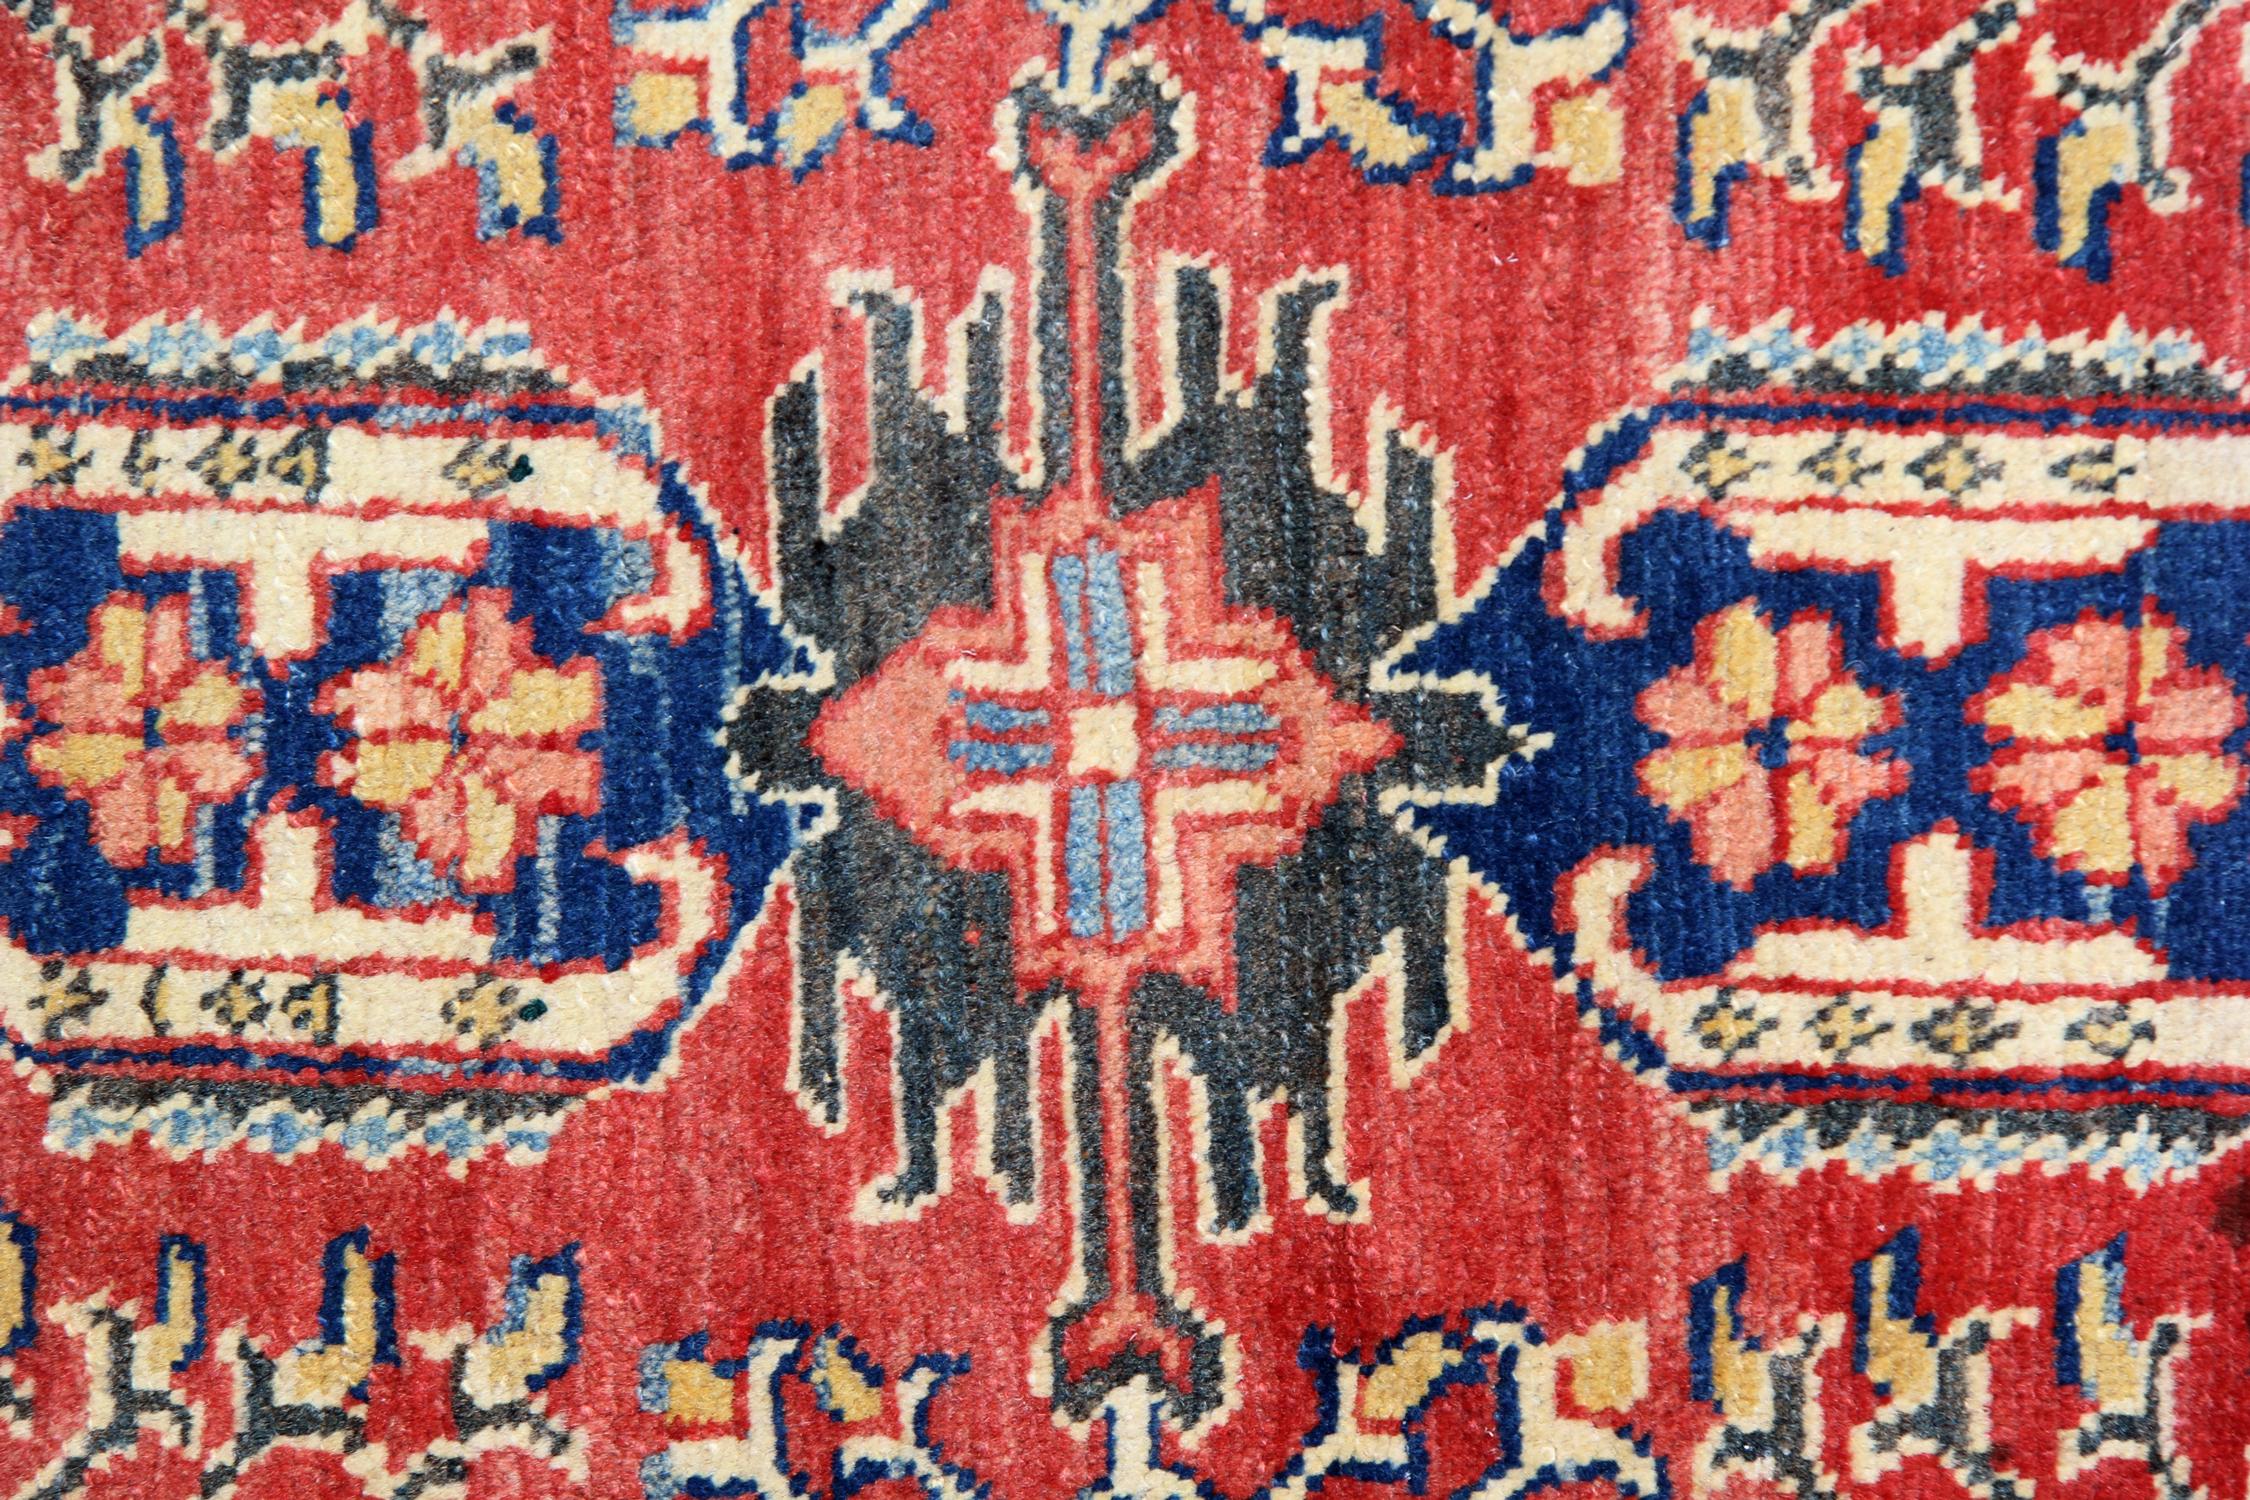 This fine wool rug was woven by hand in Afghanistan in the 1995s. The central design features a traditional geometric motif design woven in accents of cream blue and green on a rich red background. Both the colour and style in this piece are sure to